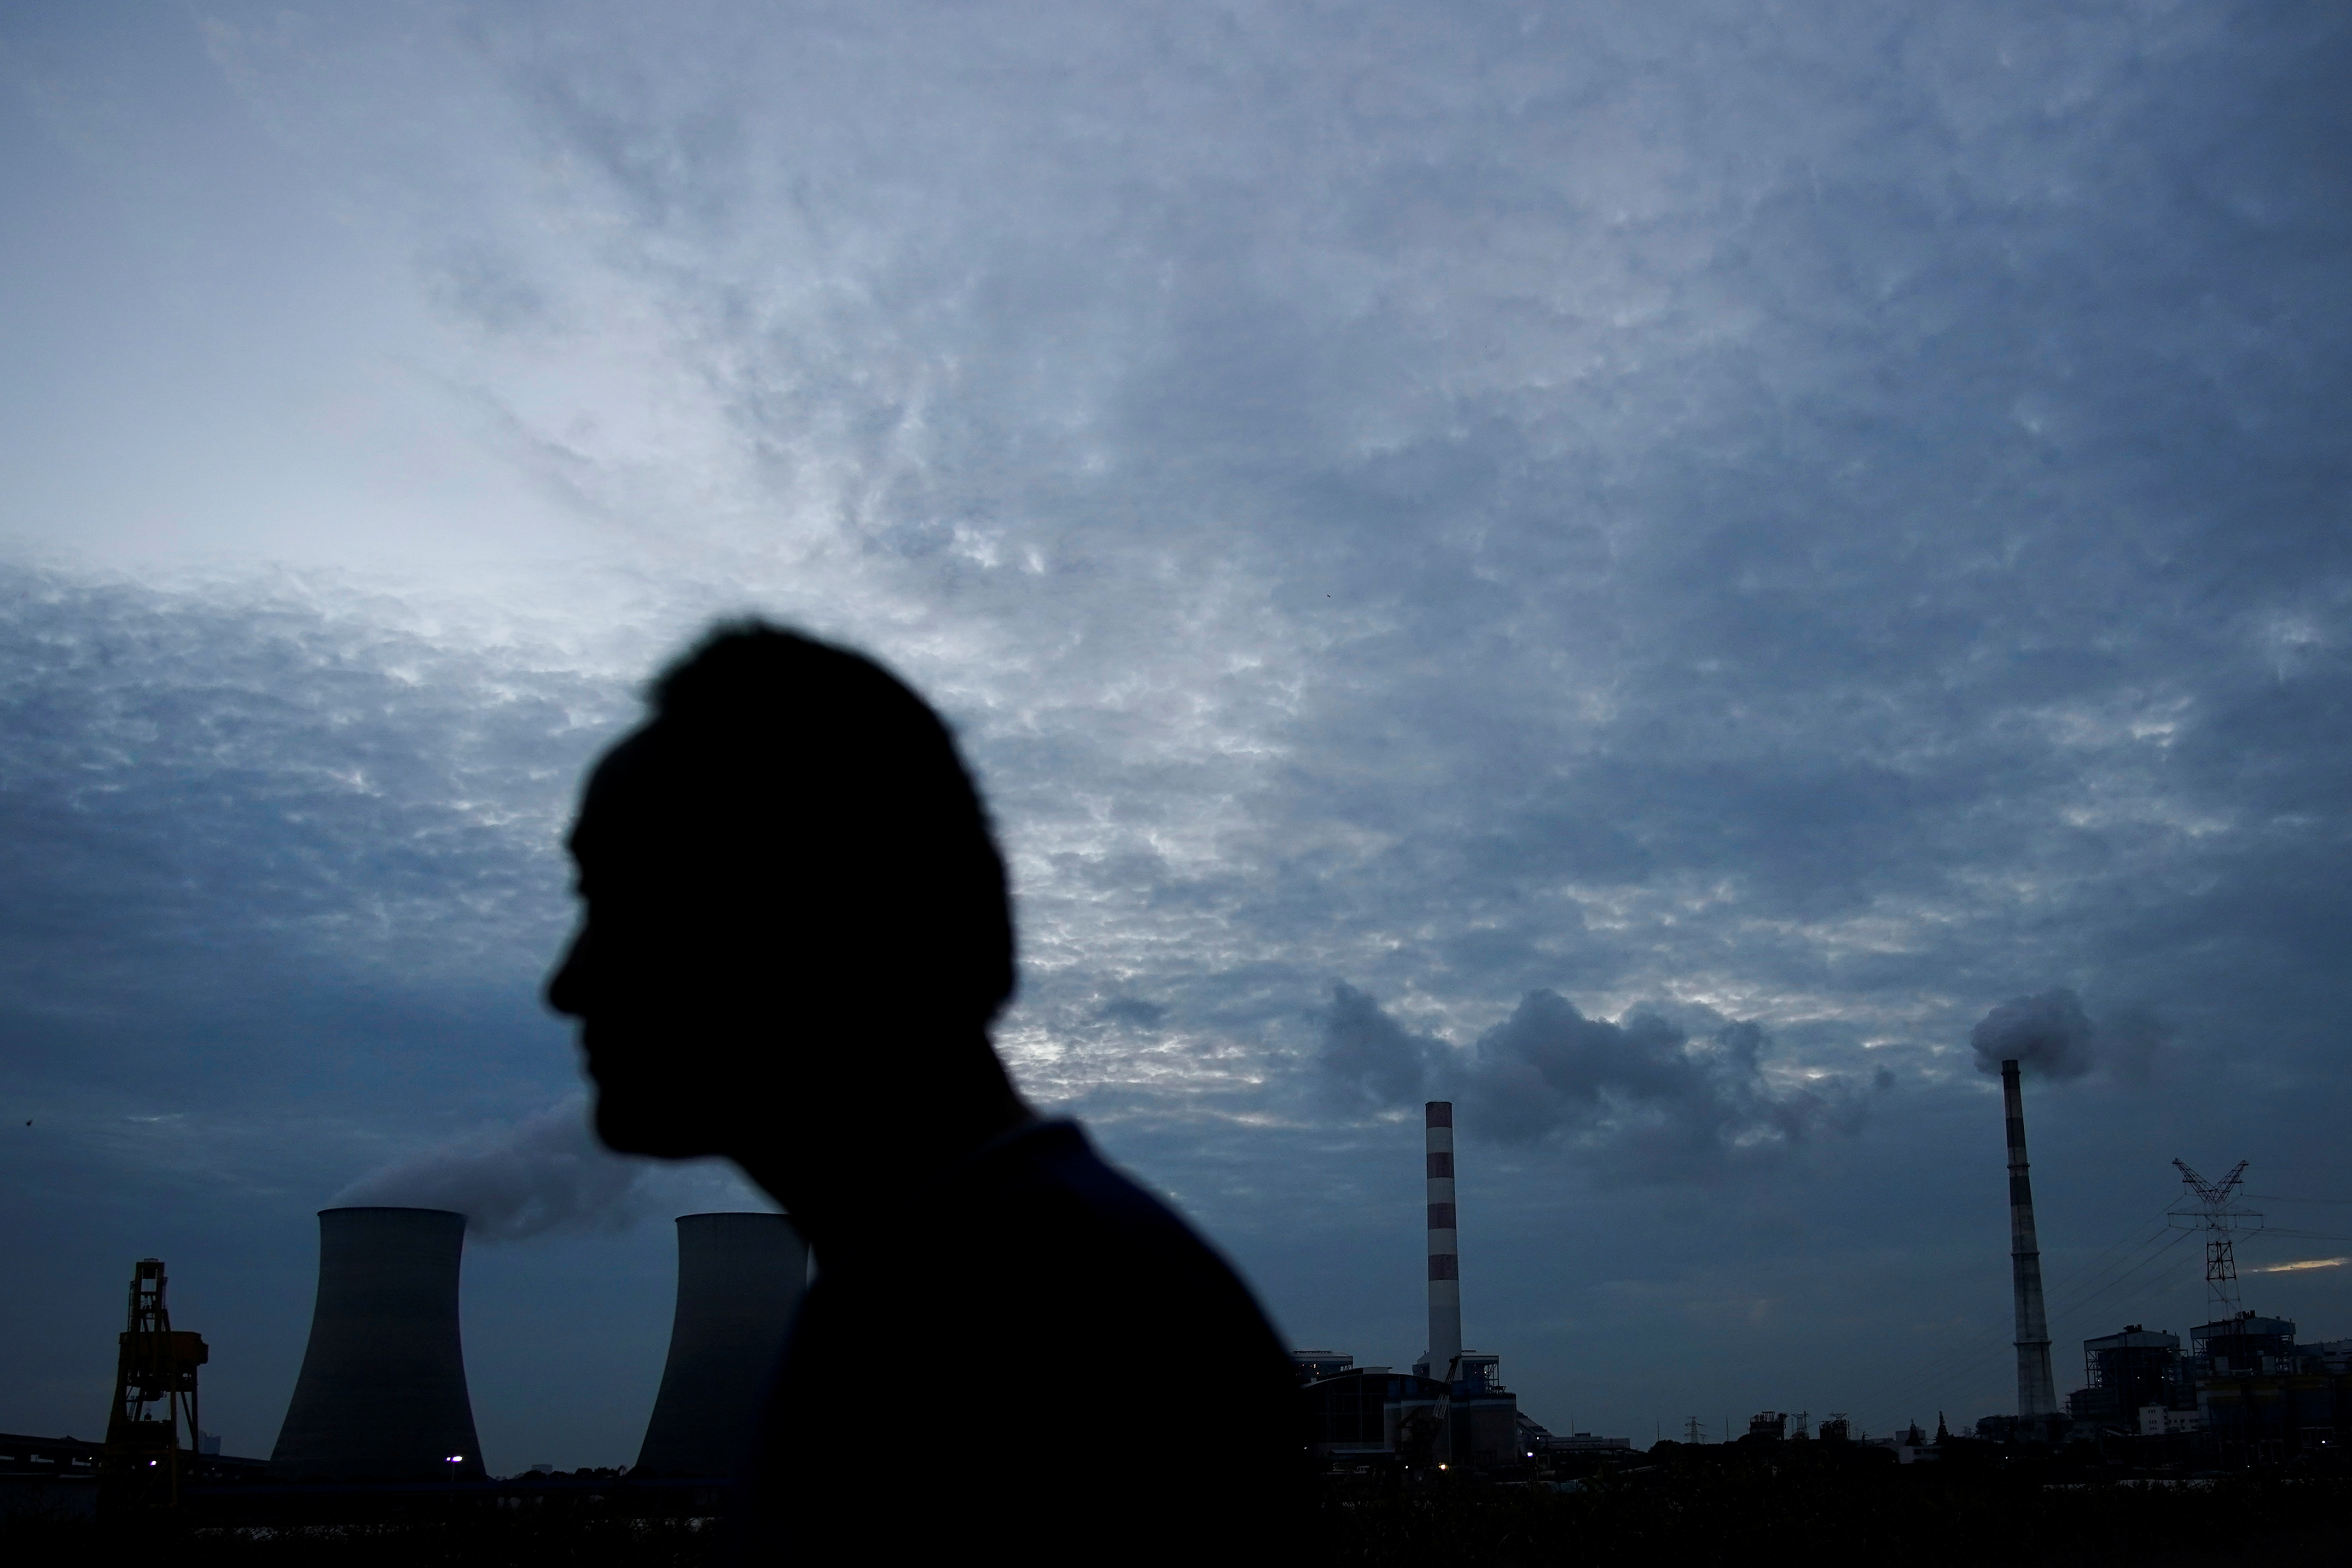 A man walks past a coal-fired power plant in Shanghai, China, October 14, 2021. REUTERS/Aly Song